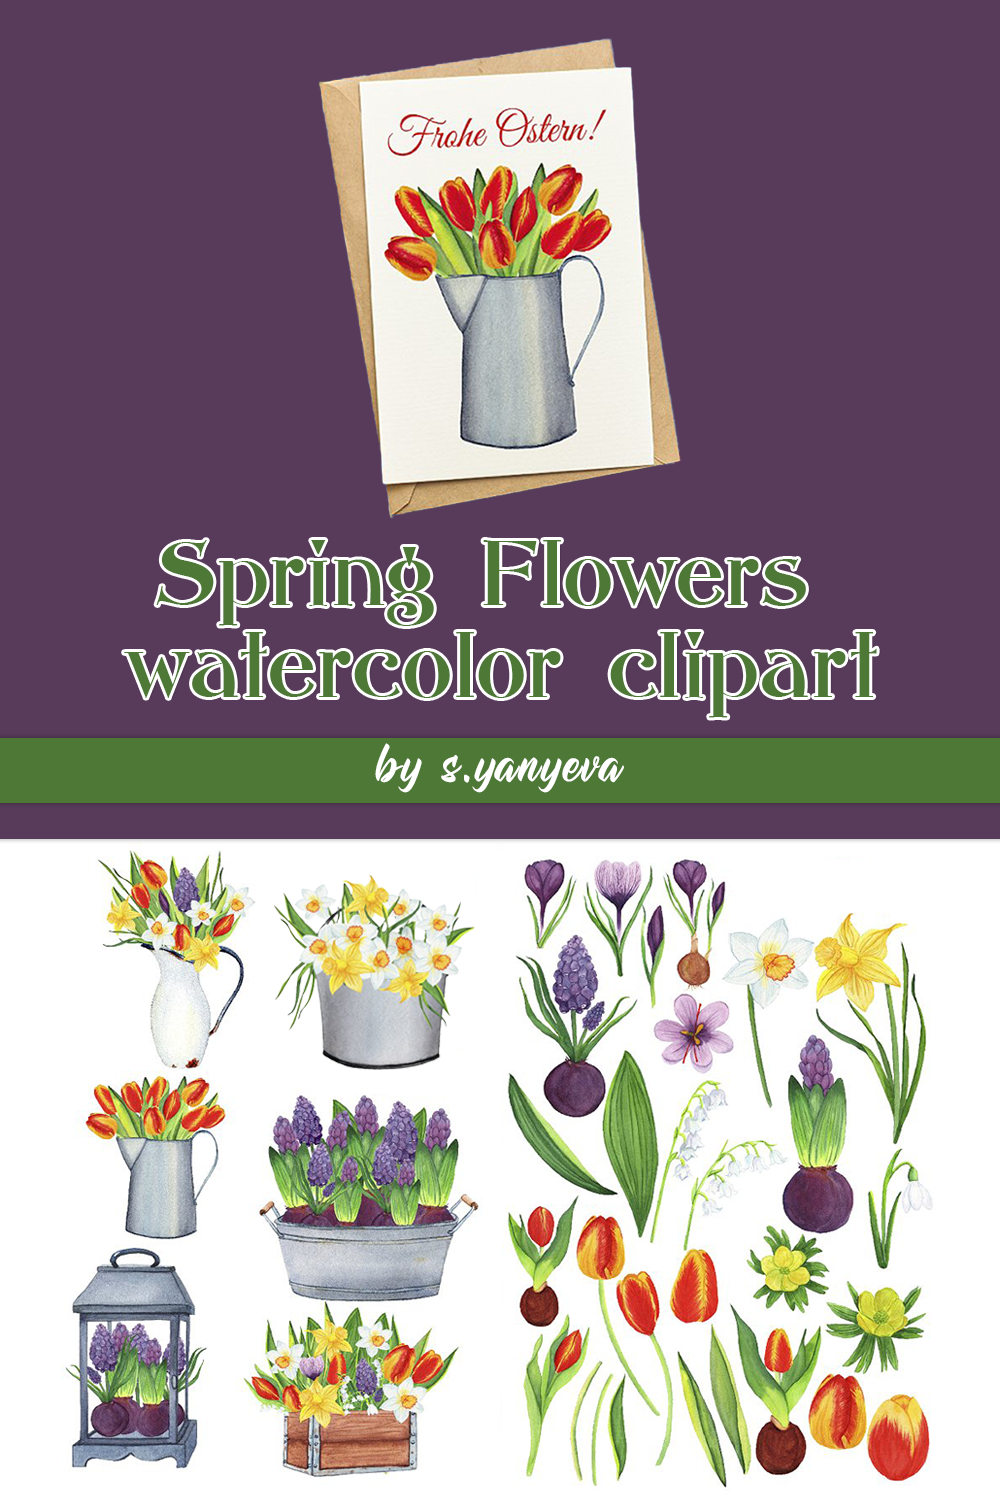 Spring flowers watercolor clipart of pinterest.